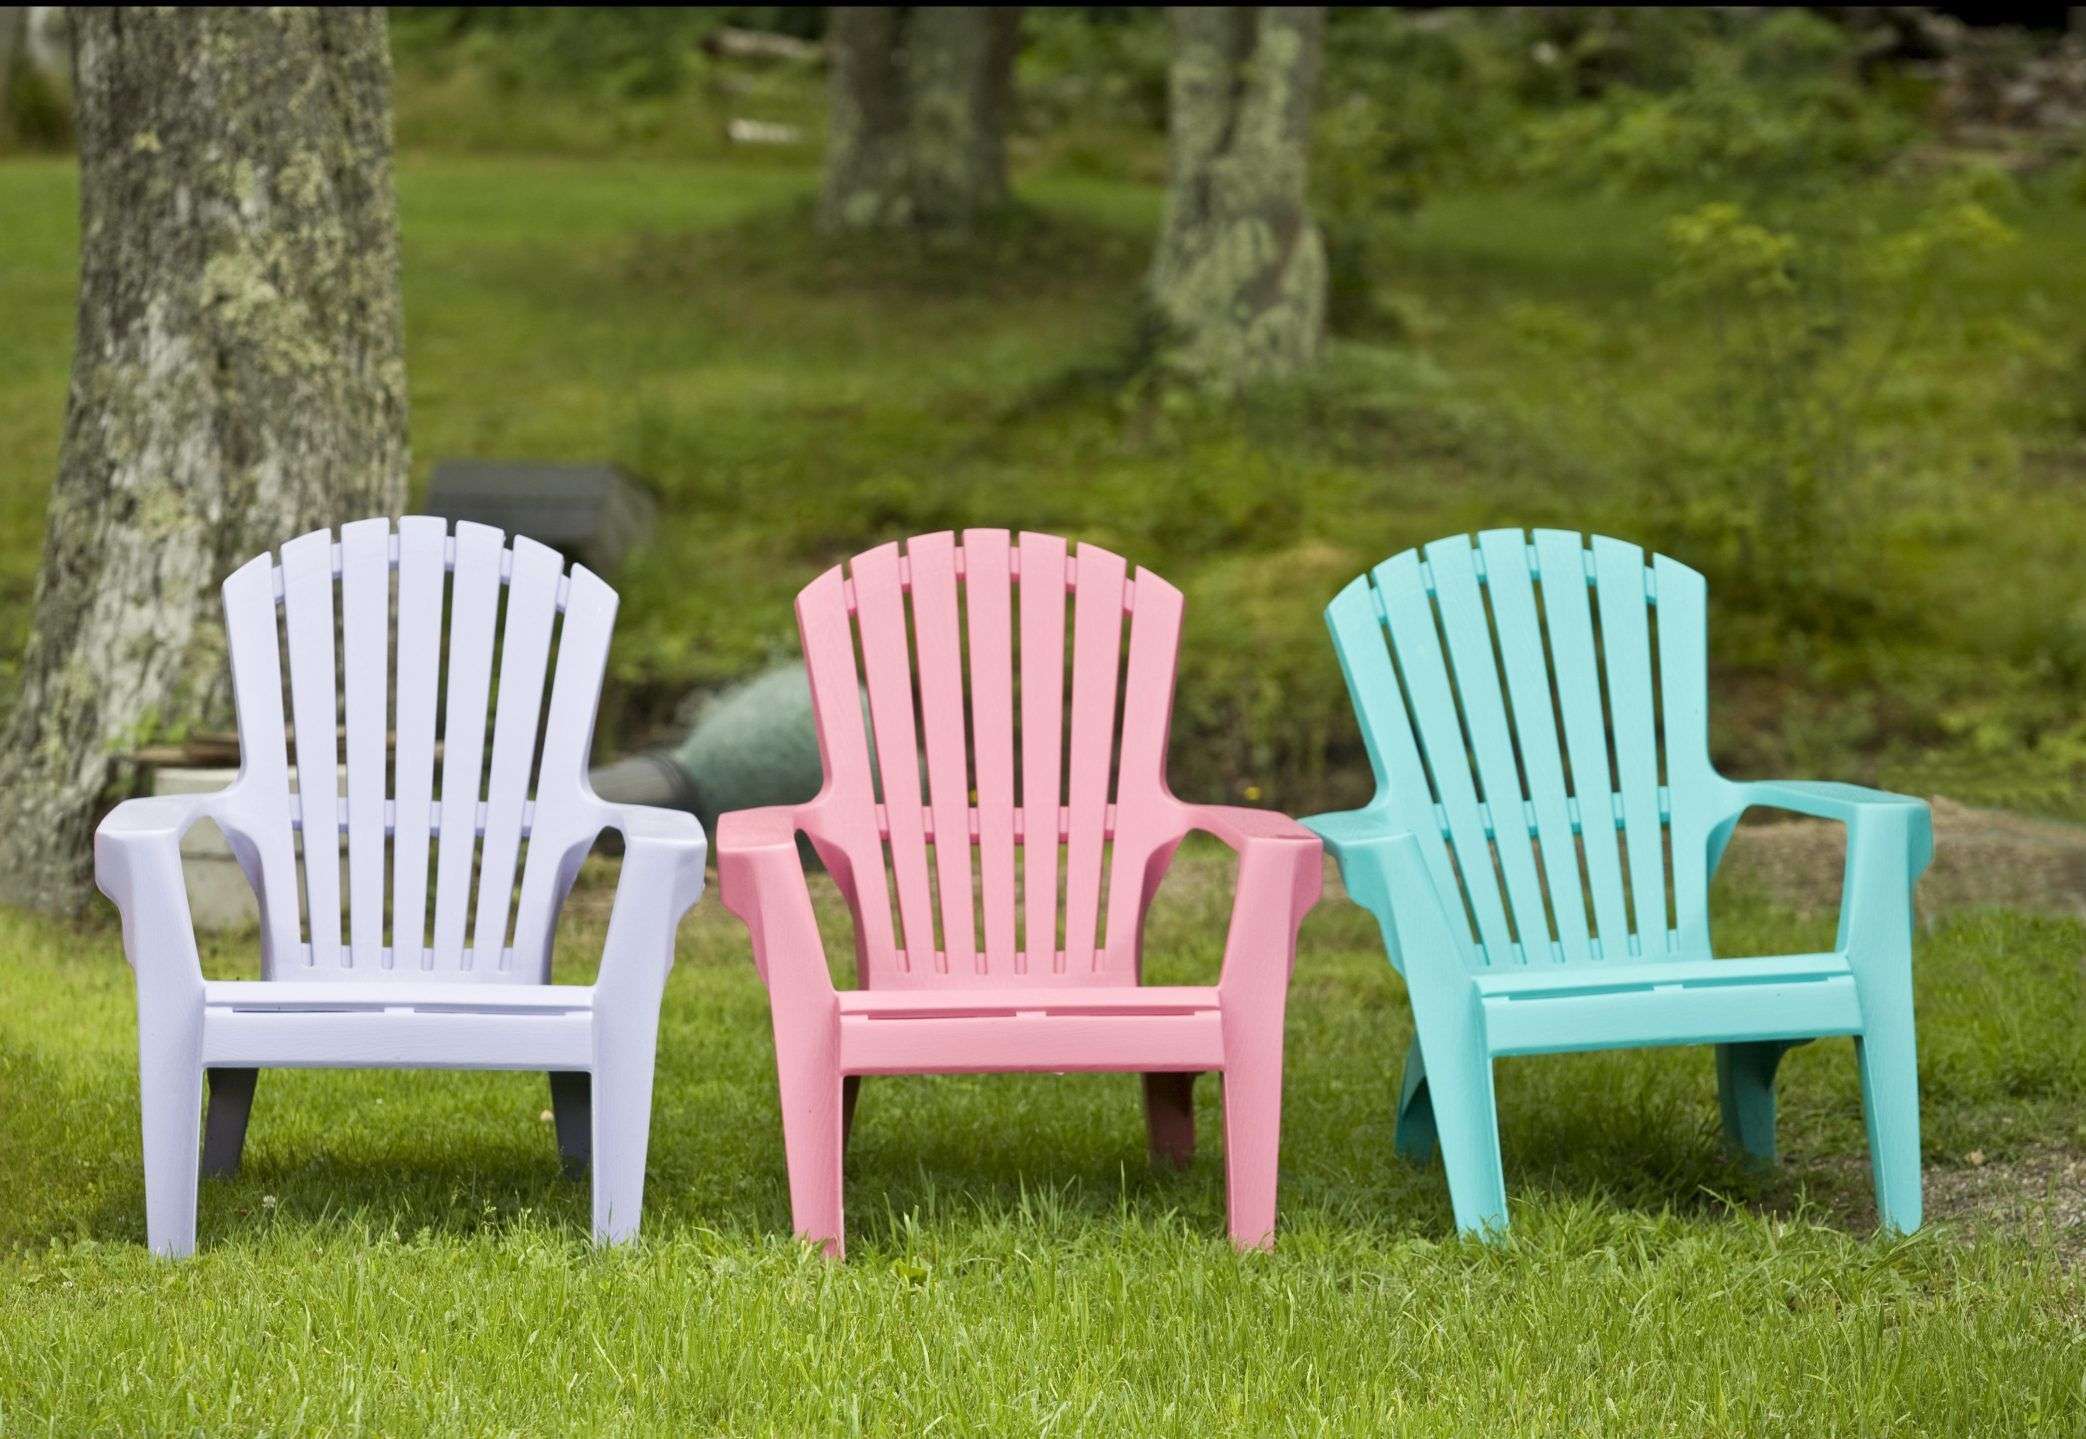 How to Paint Plastic Lawn Chairs